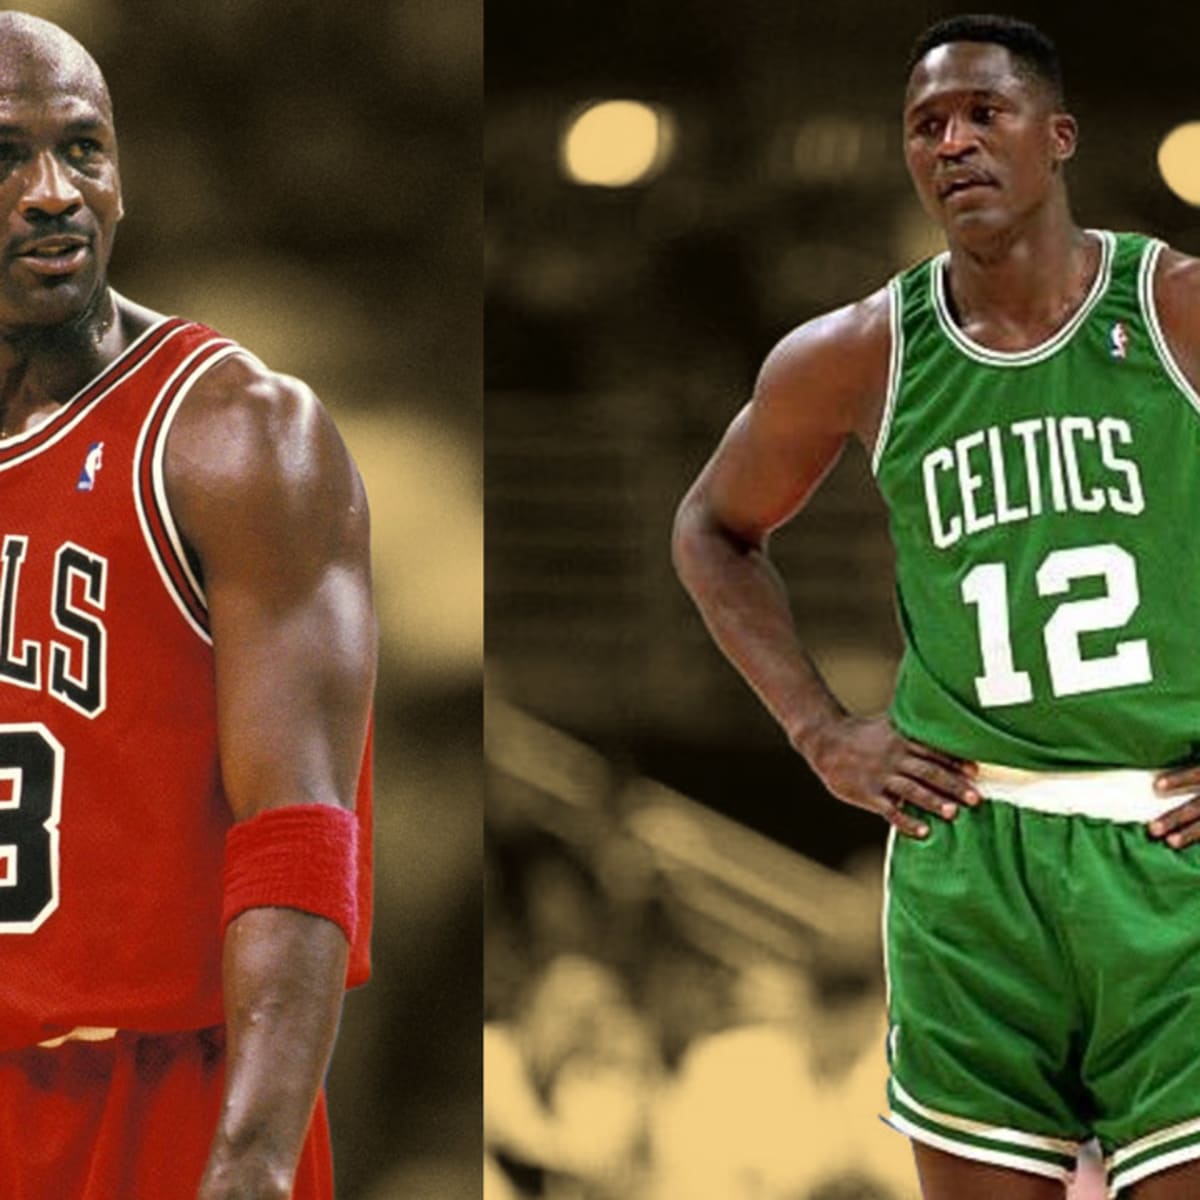 Boston Celtics Had A Great Plan To Land Michael Jordan And Team Up With Dominique  Wilkins - Fadeaway World